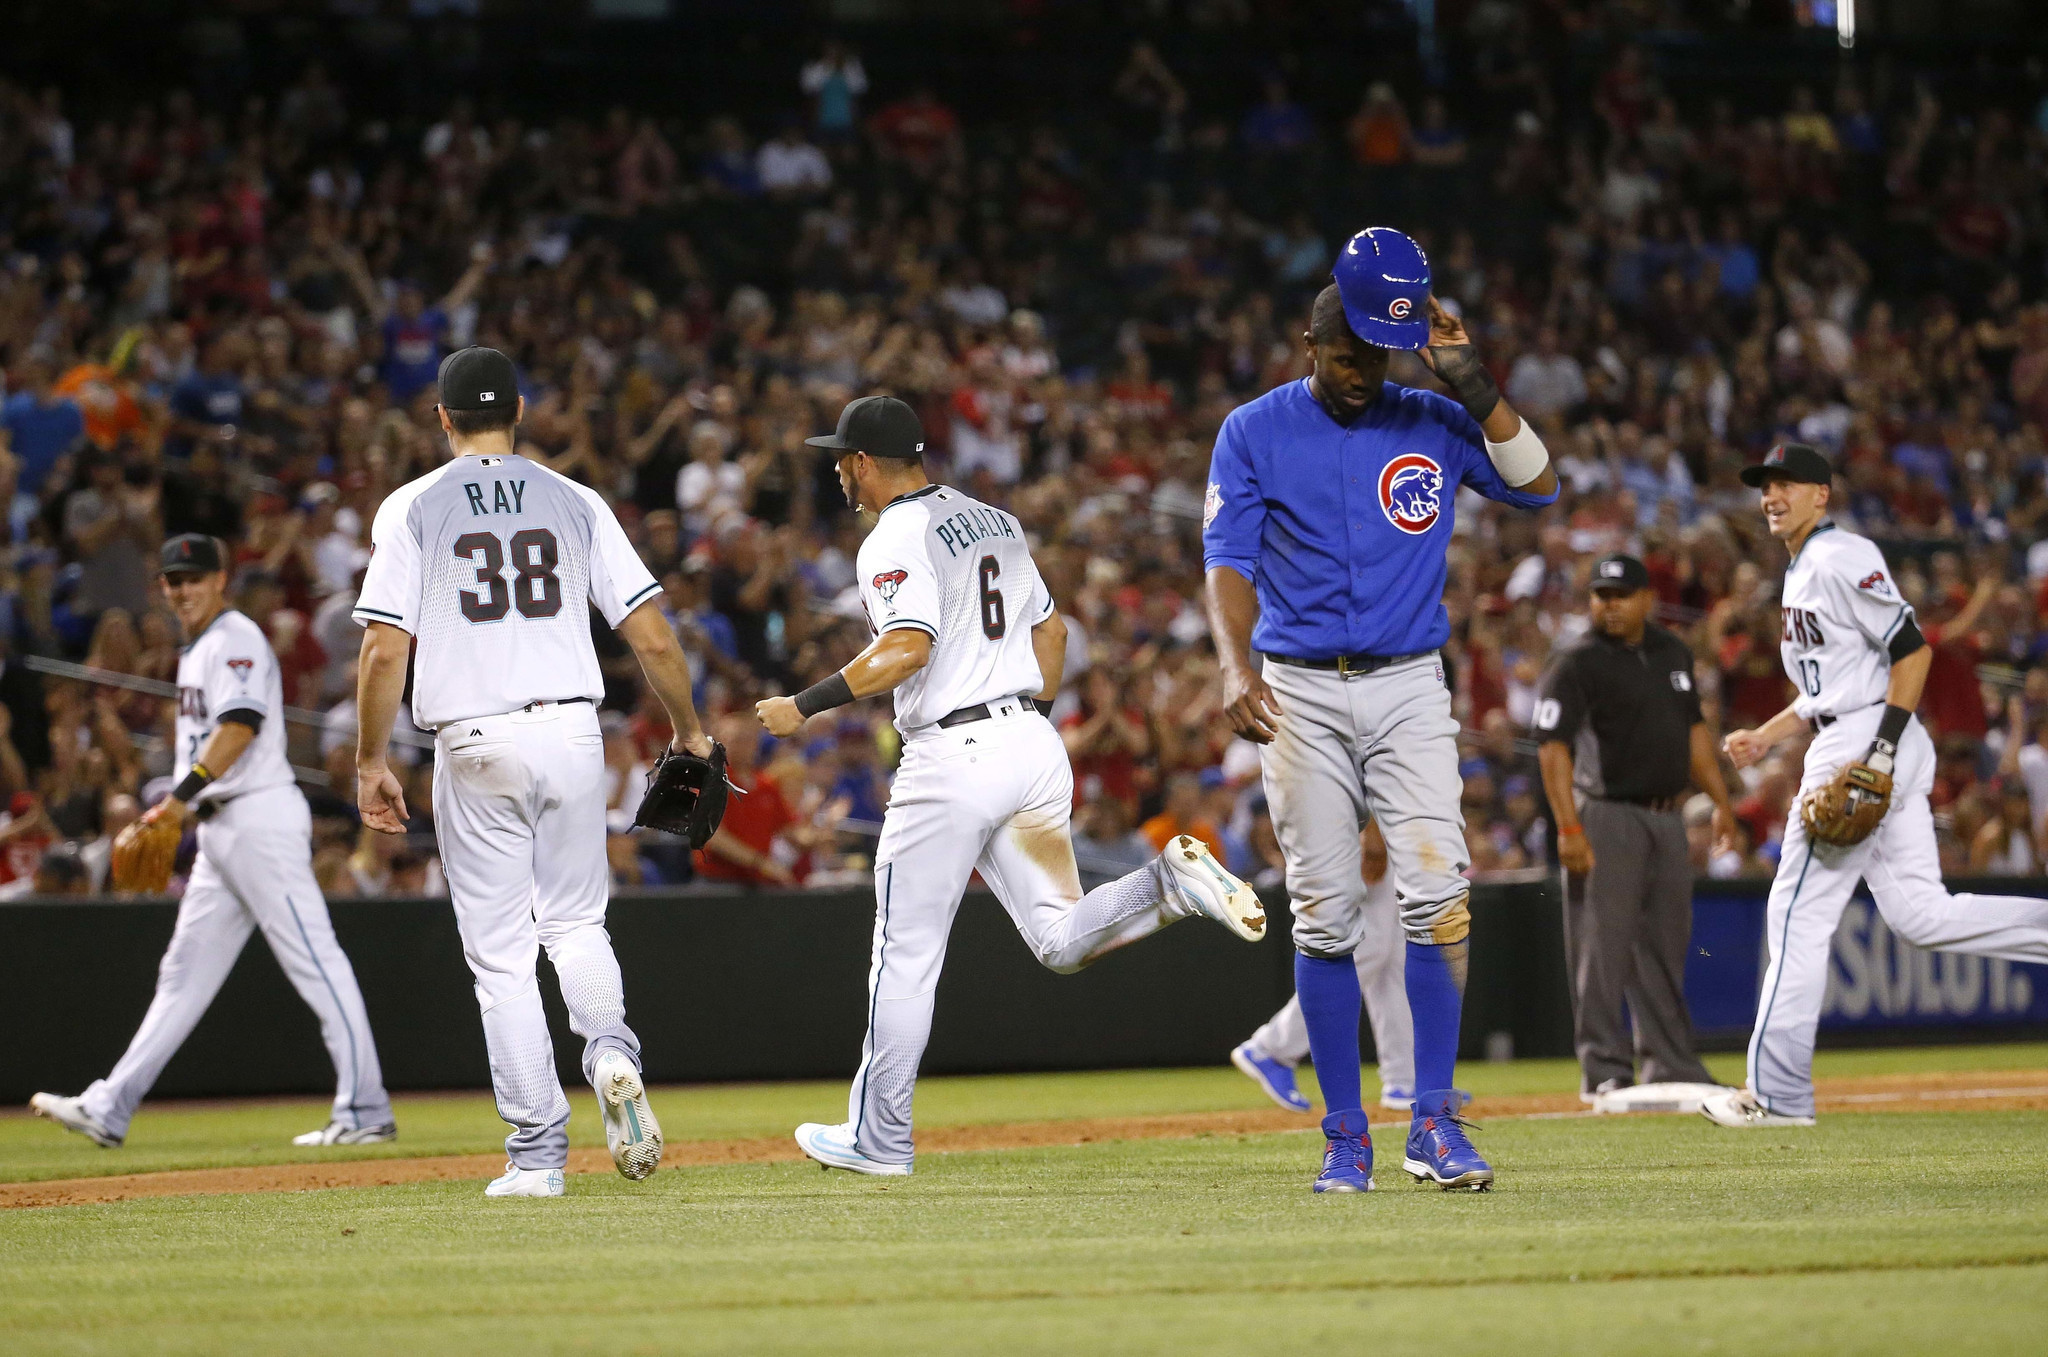 Cubs, Diamondbacks Evenly Matched Heading Into Series Finale